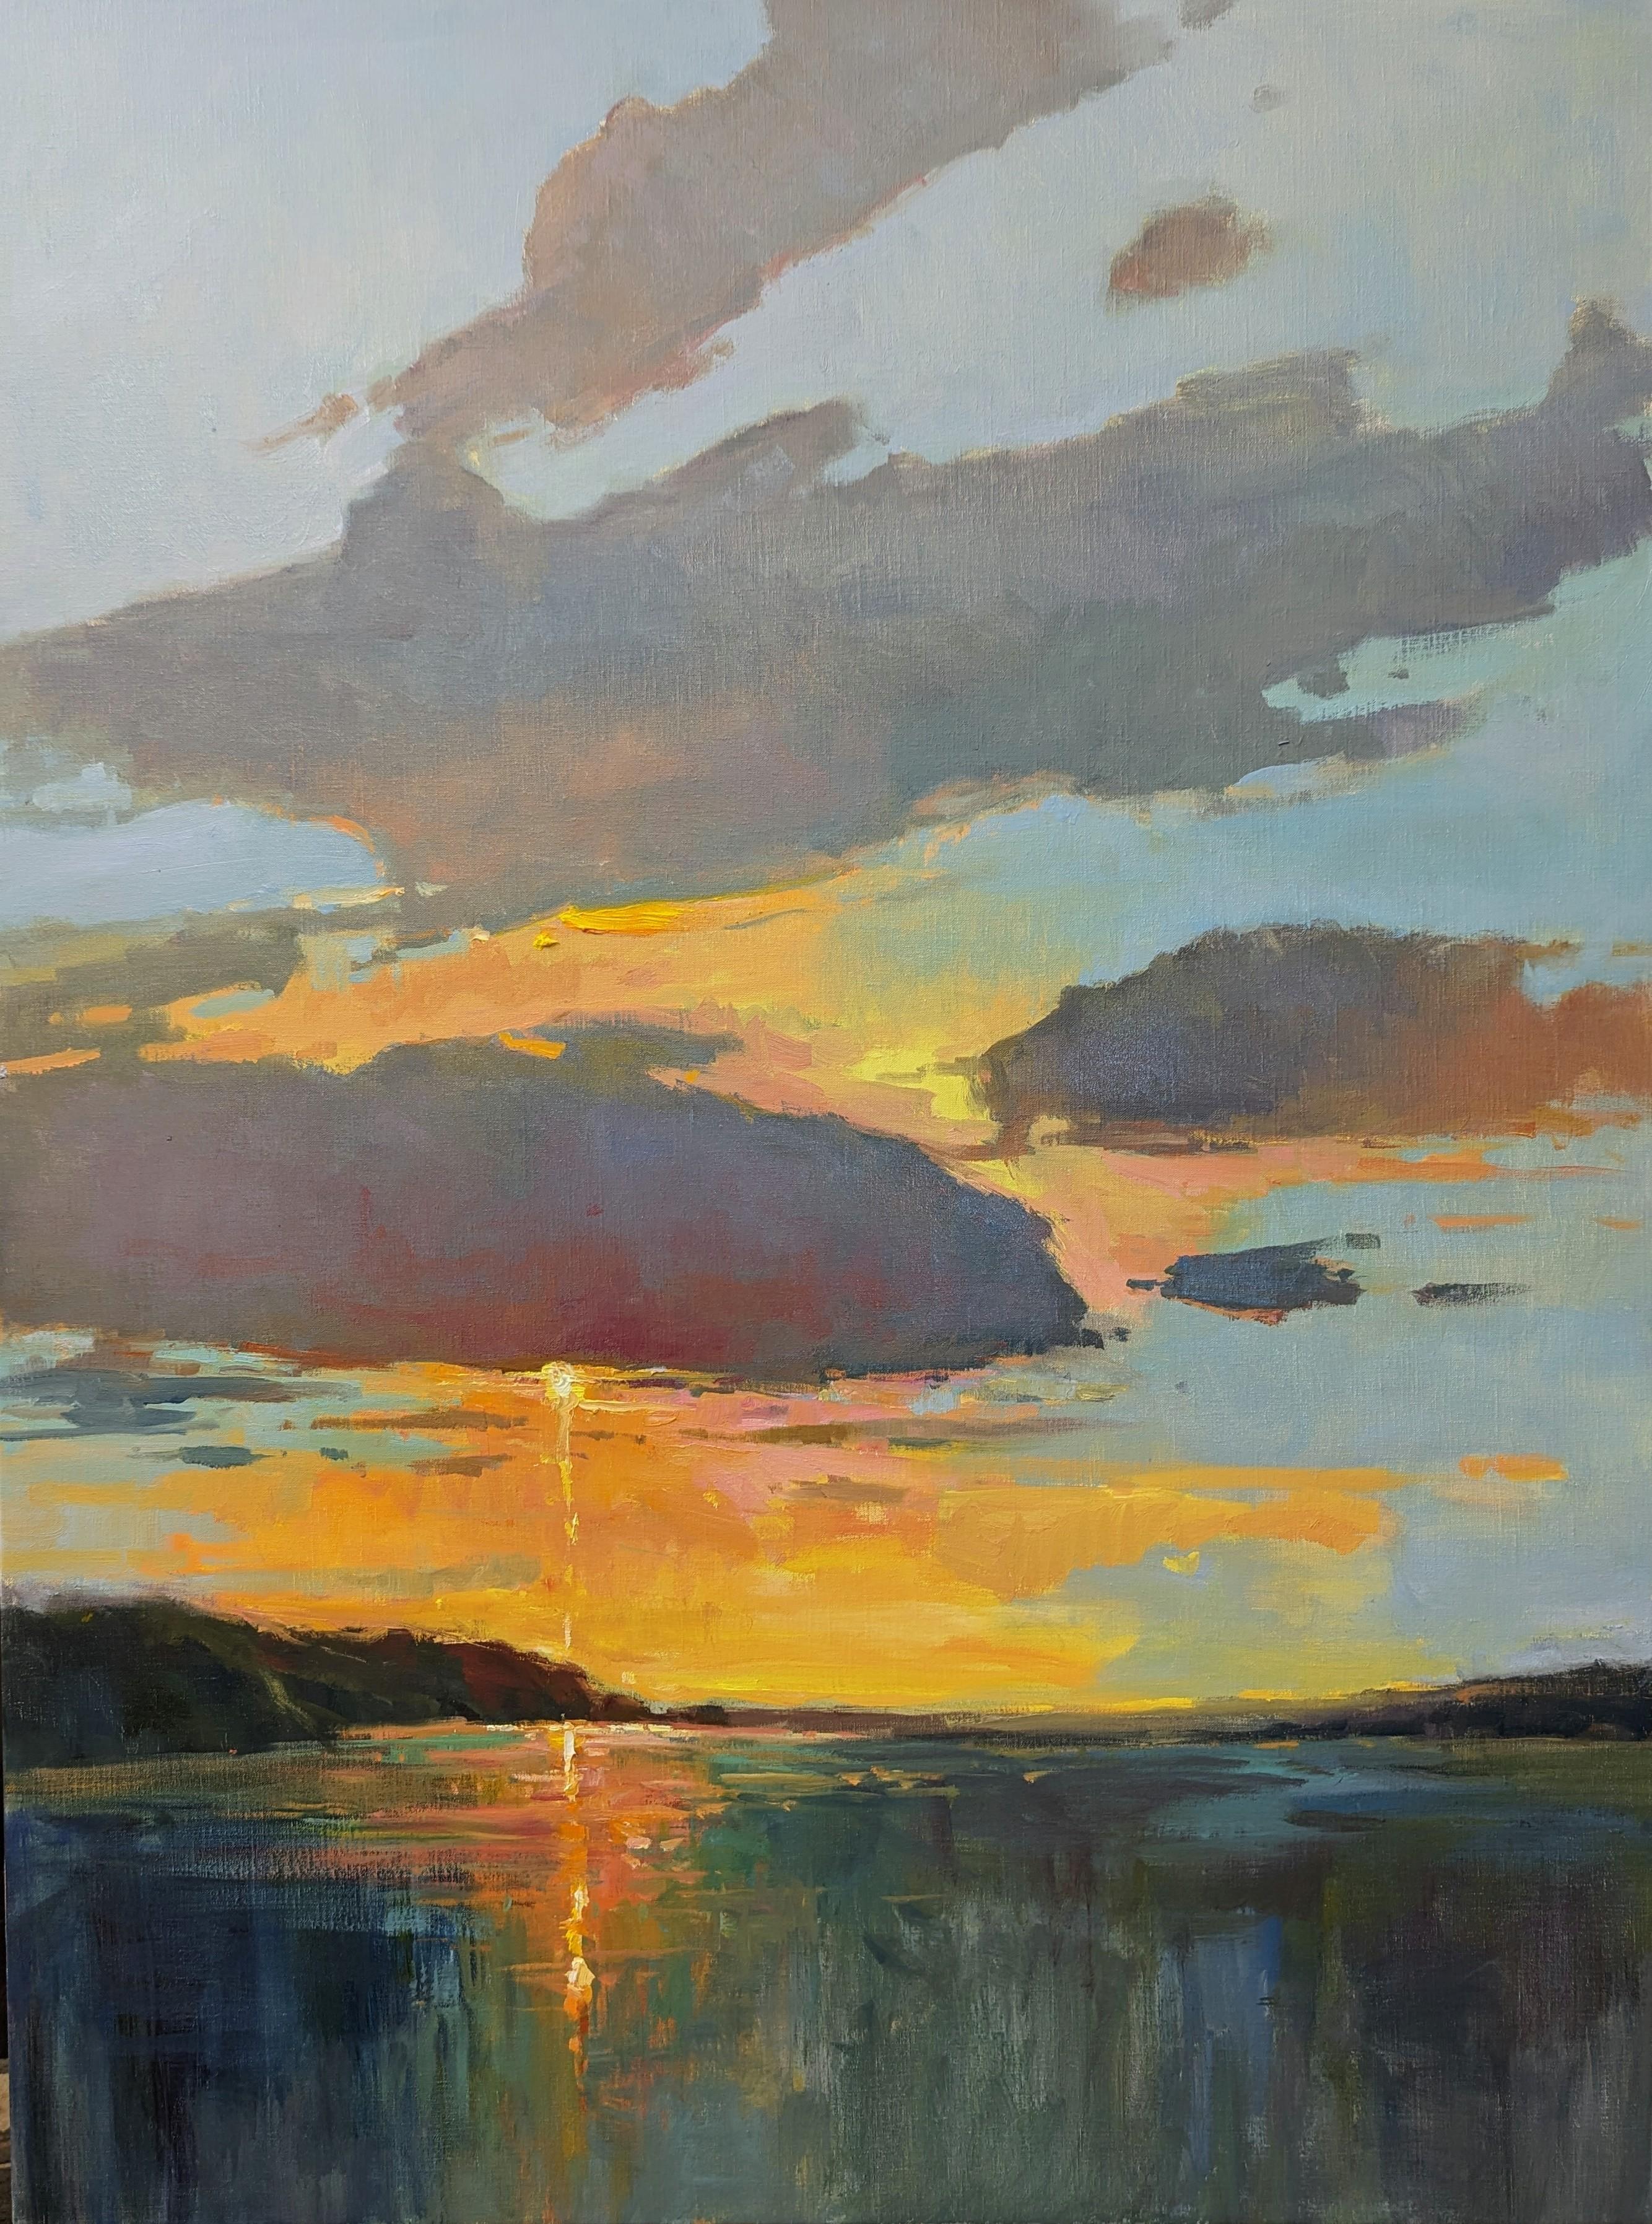 Millie Gosch is an avid plein air painter who paints studies from real life and from these studies she creates her beautiful landscape pieces. An experienced artist, she has worked for over 25 years as a professional artist using oil as her medium